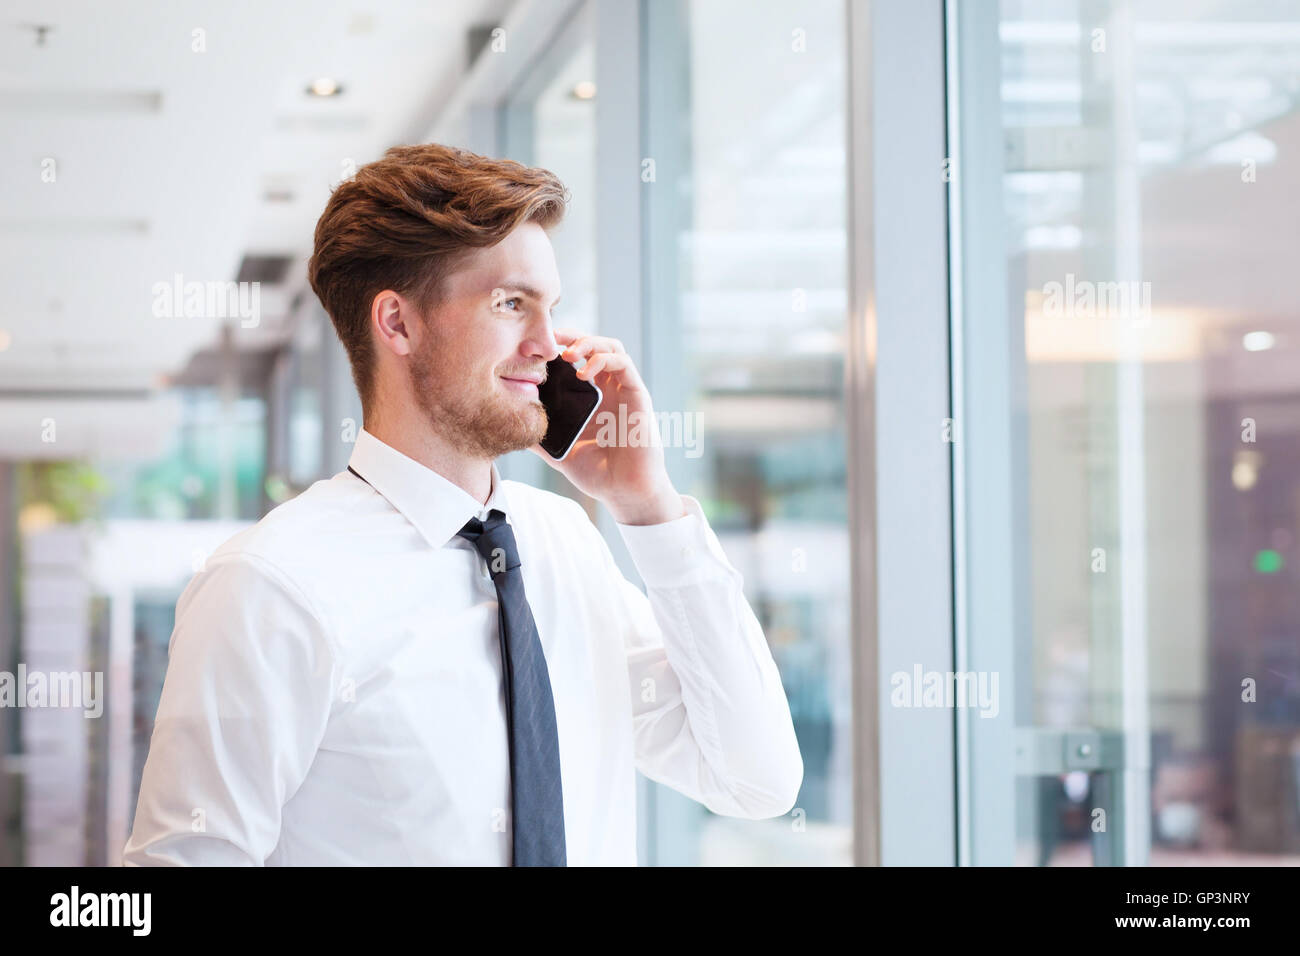 businessman talking on phone and smiling Stock Photo